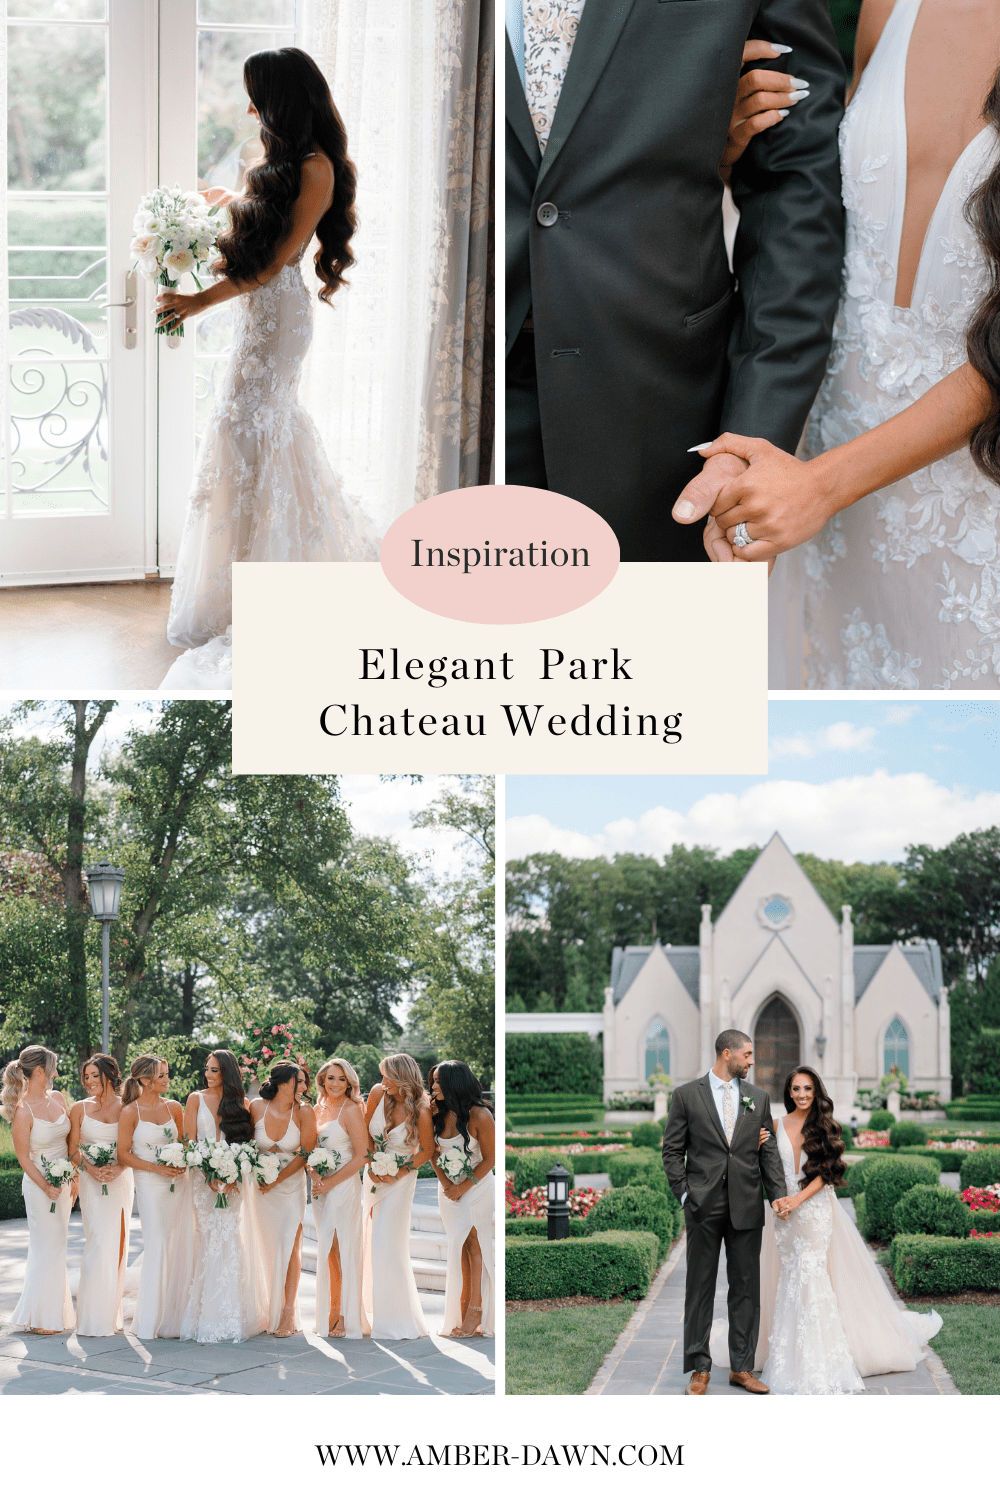 New Jersey Wedding photographer, Amber Dawn Photography, captures Dreamy Park Chateau wedding